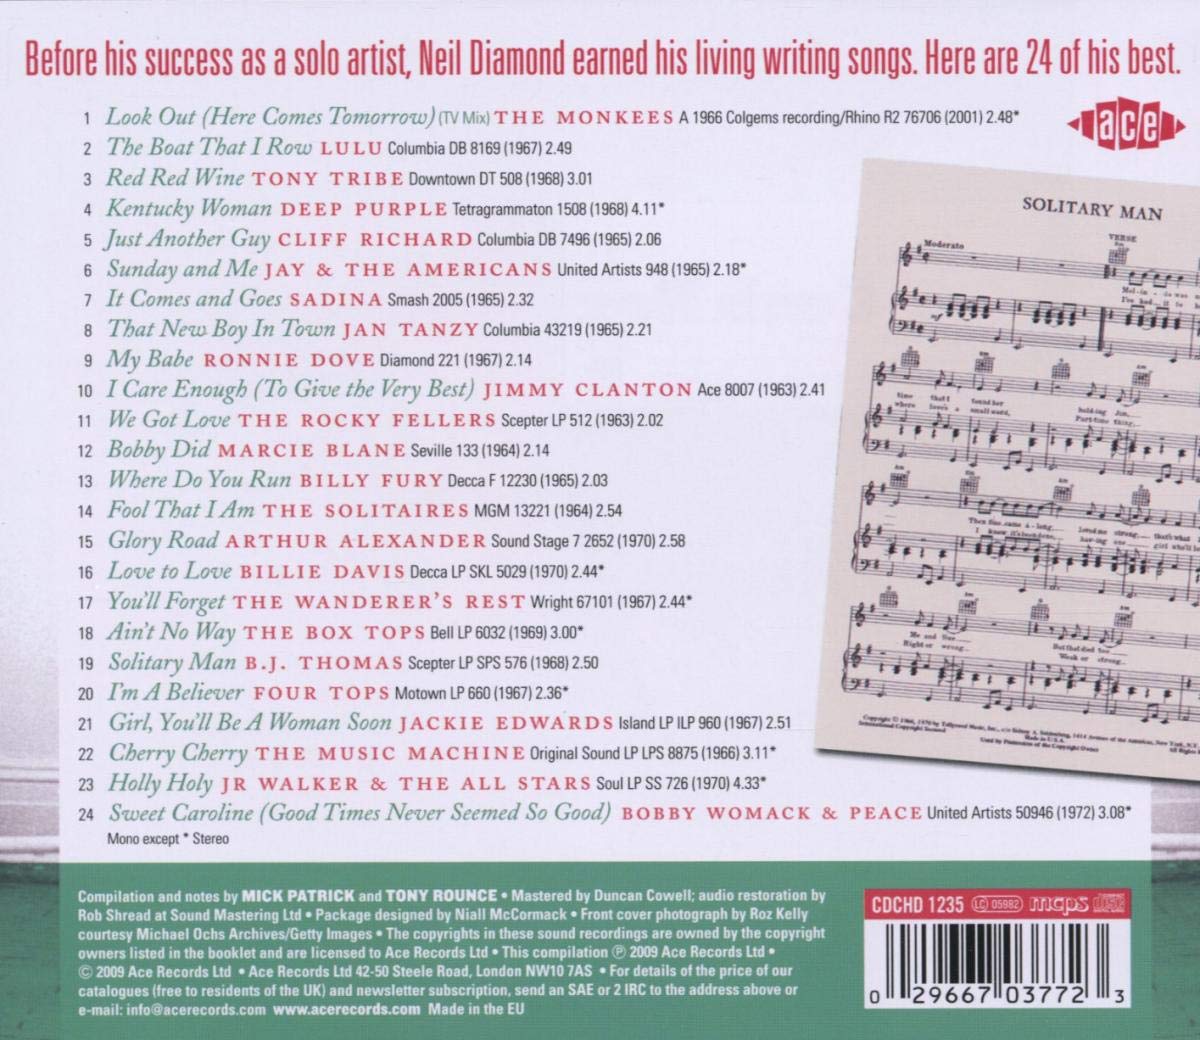 Various Artists/Solitary Man: Early Songs Of Neil Diamond [CD]